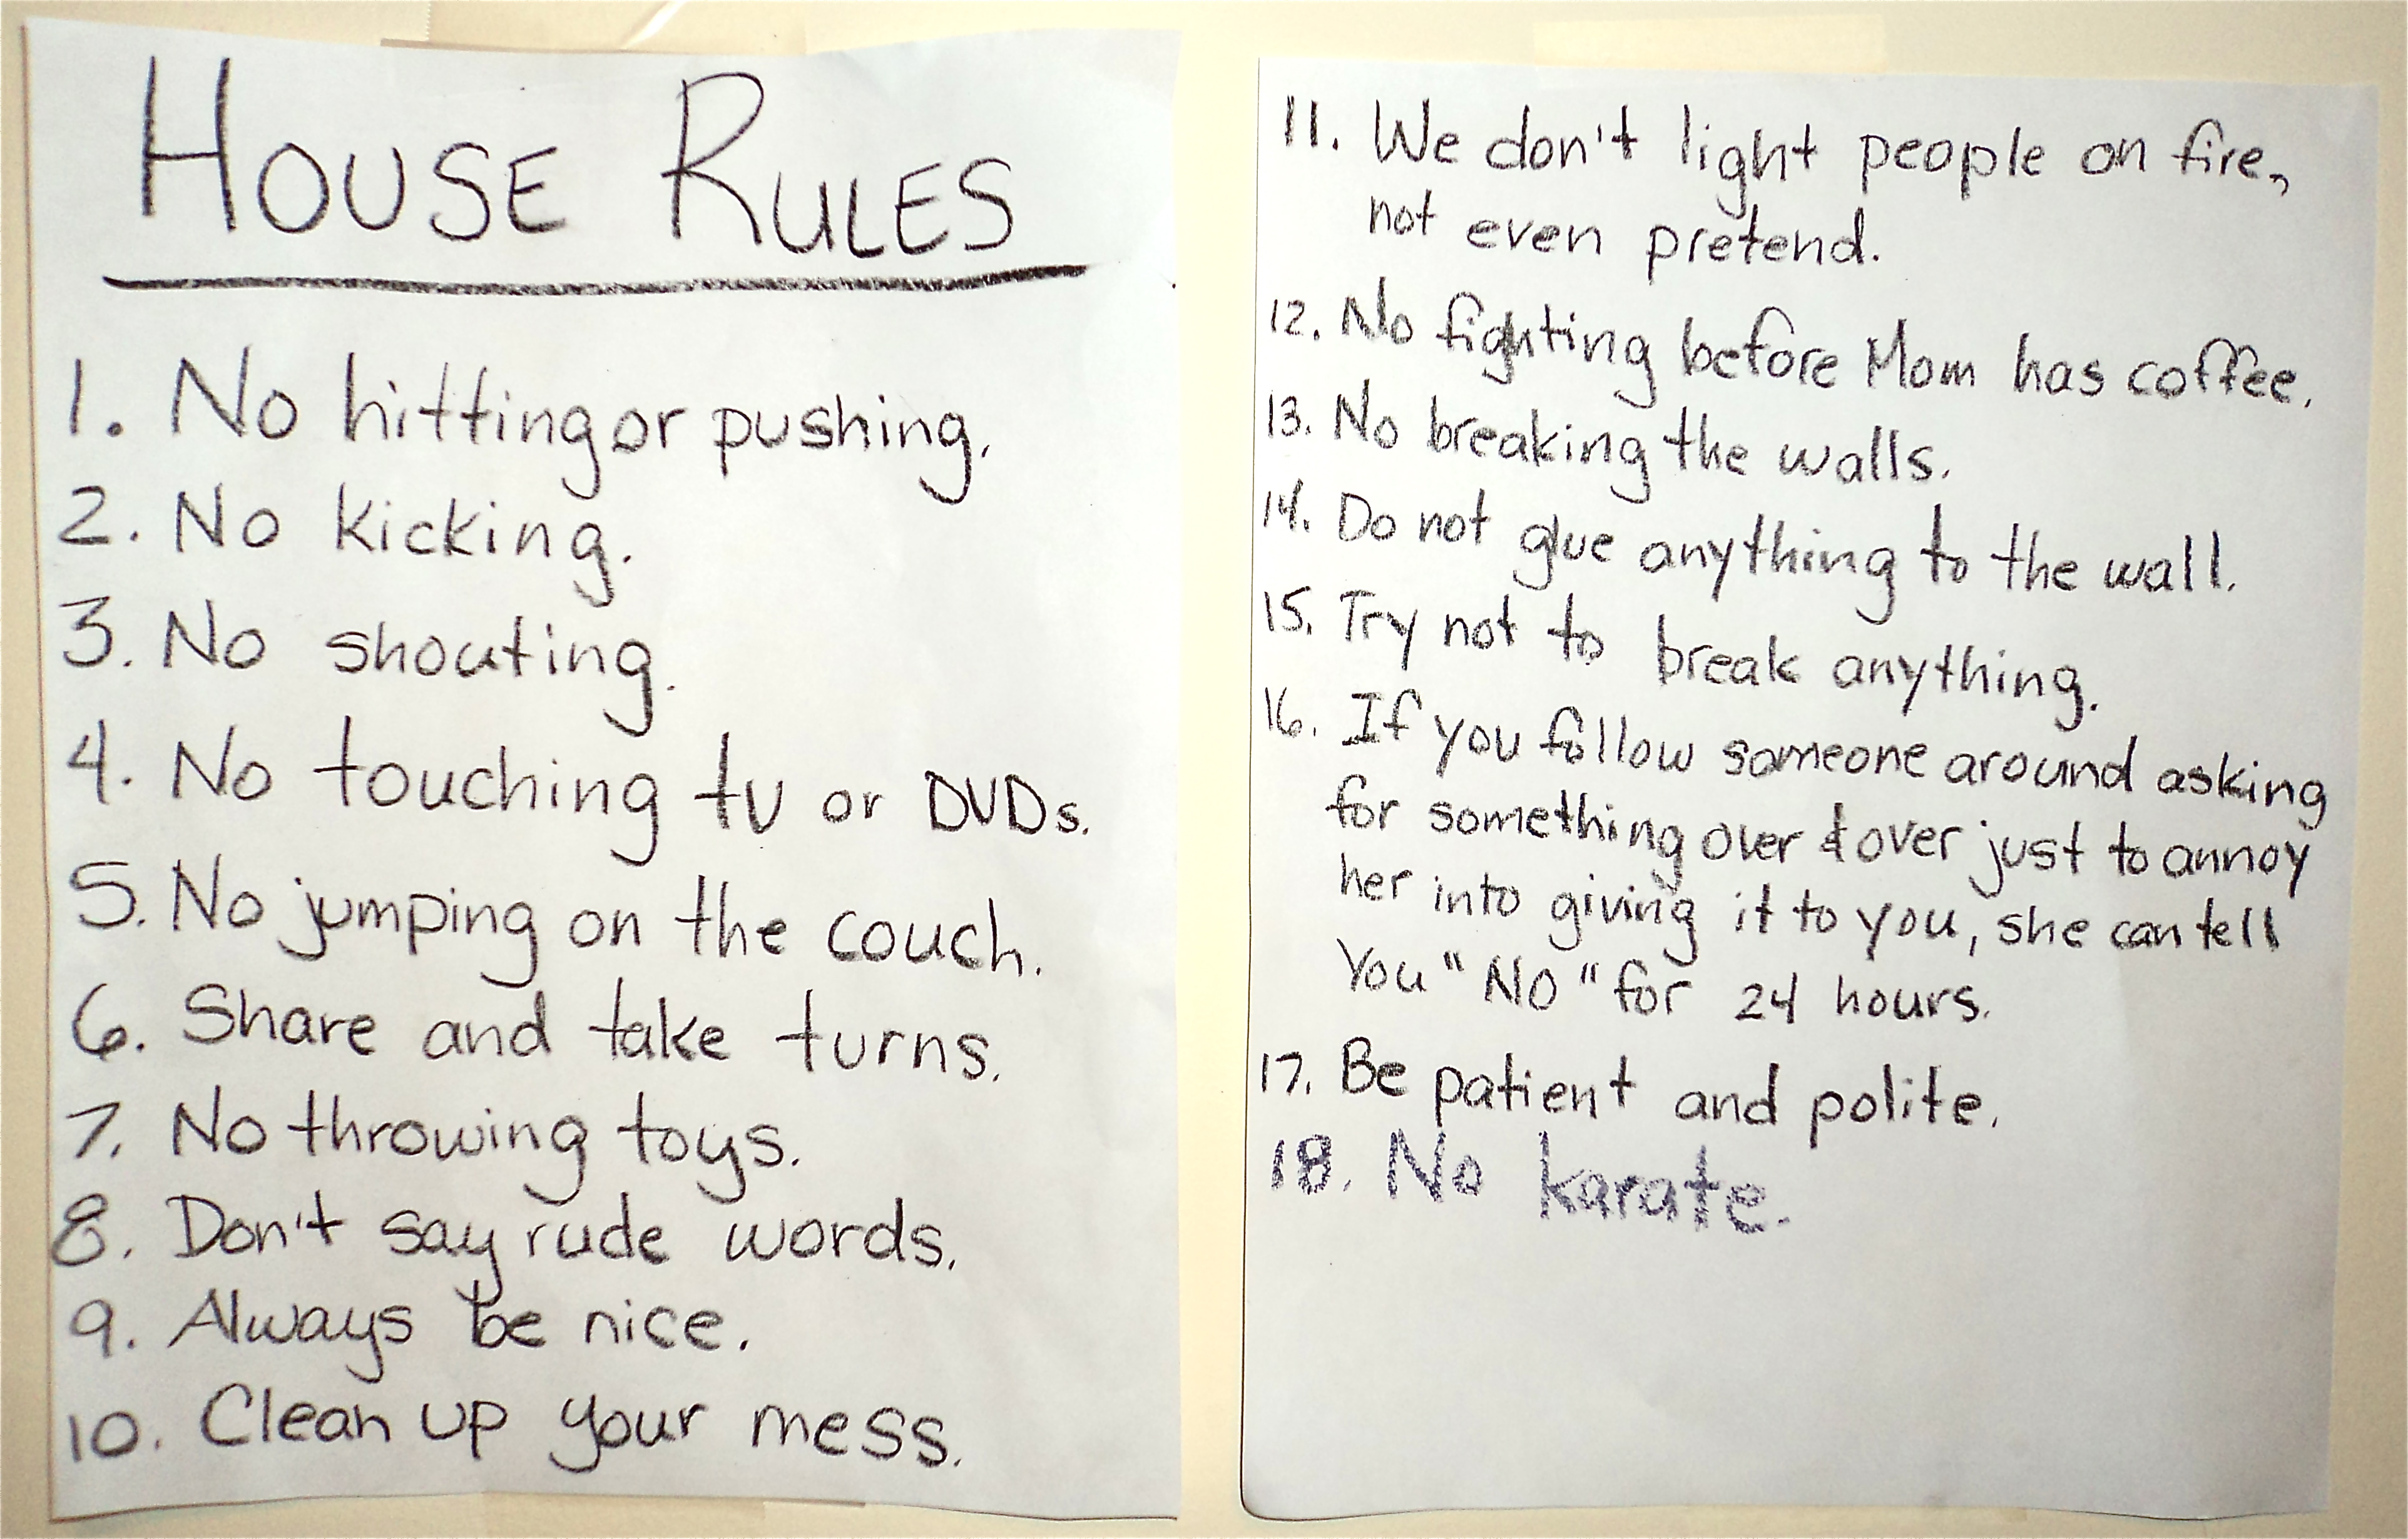 House Rules - Let Me Start By Saying